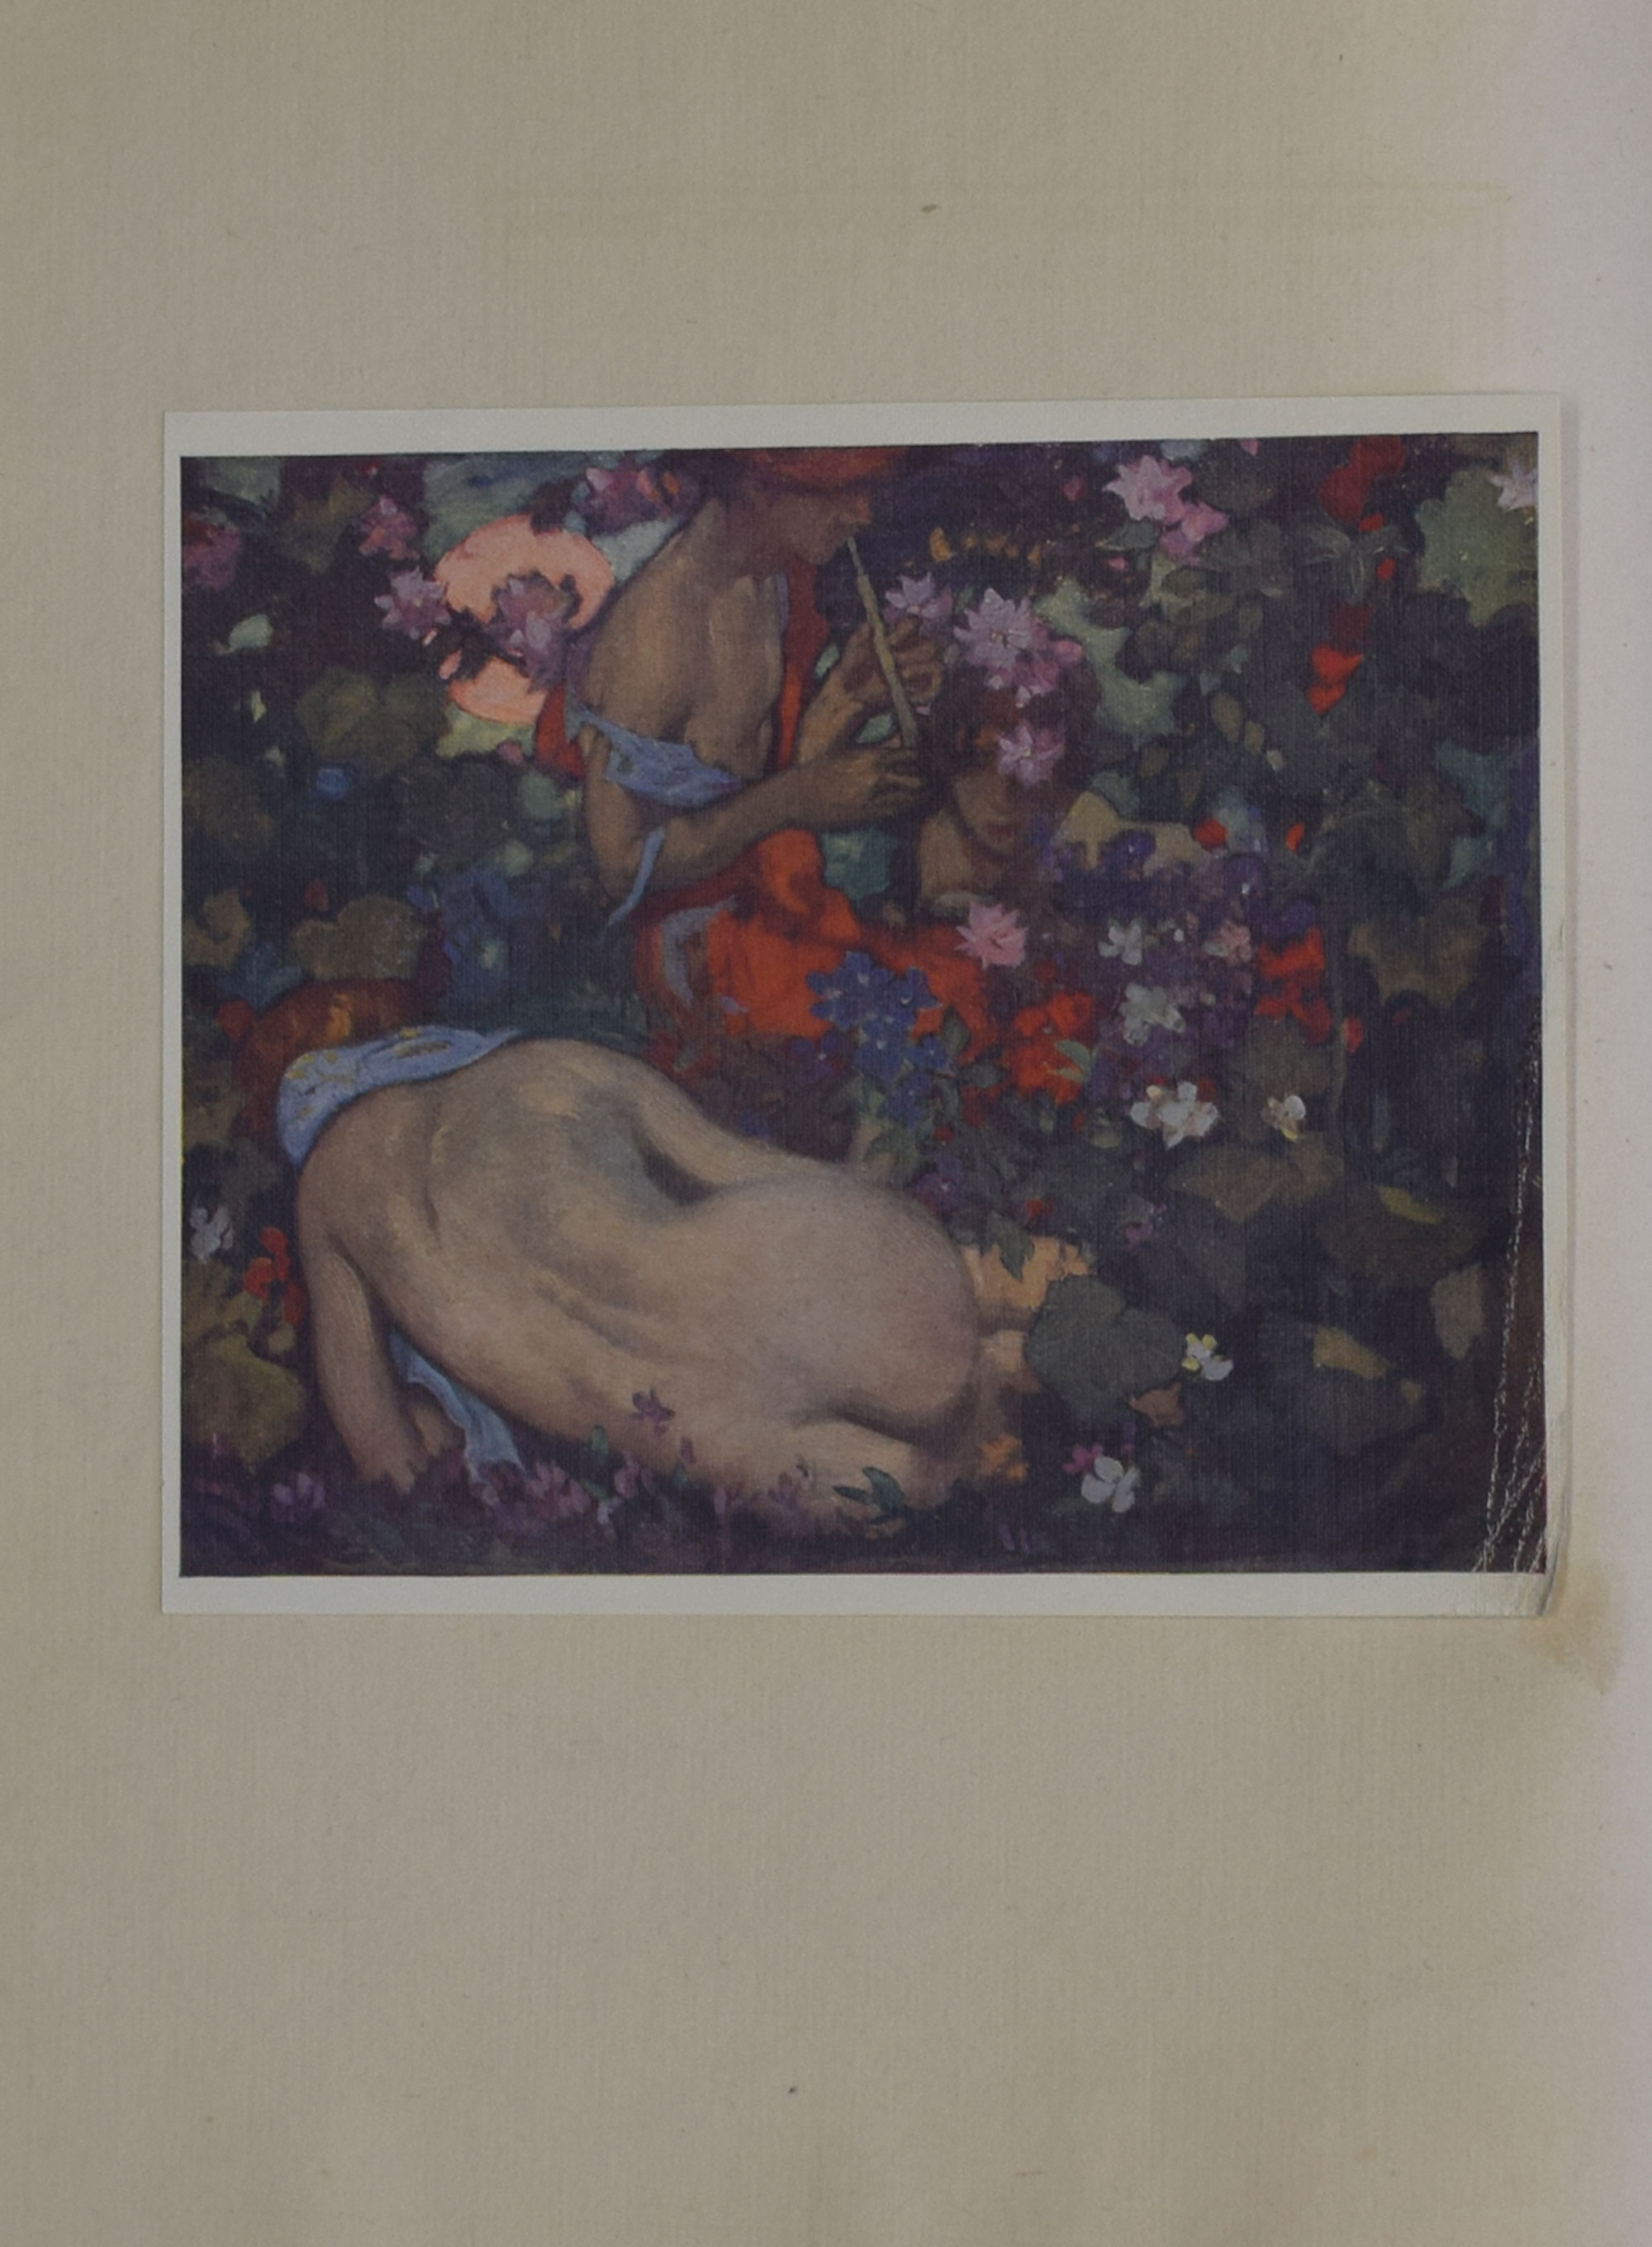 The Girl and the Faun, Illustrated by Frank Brangwyn. Signed limited de luxe edition.